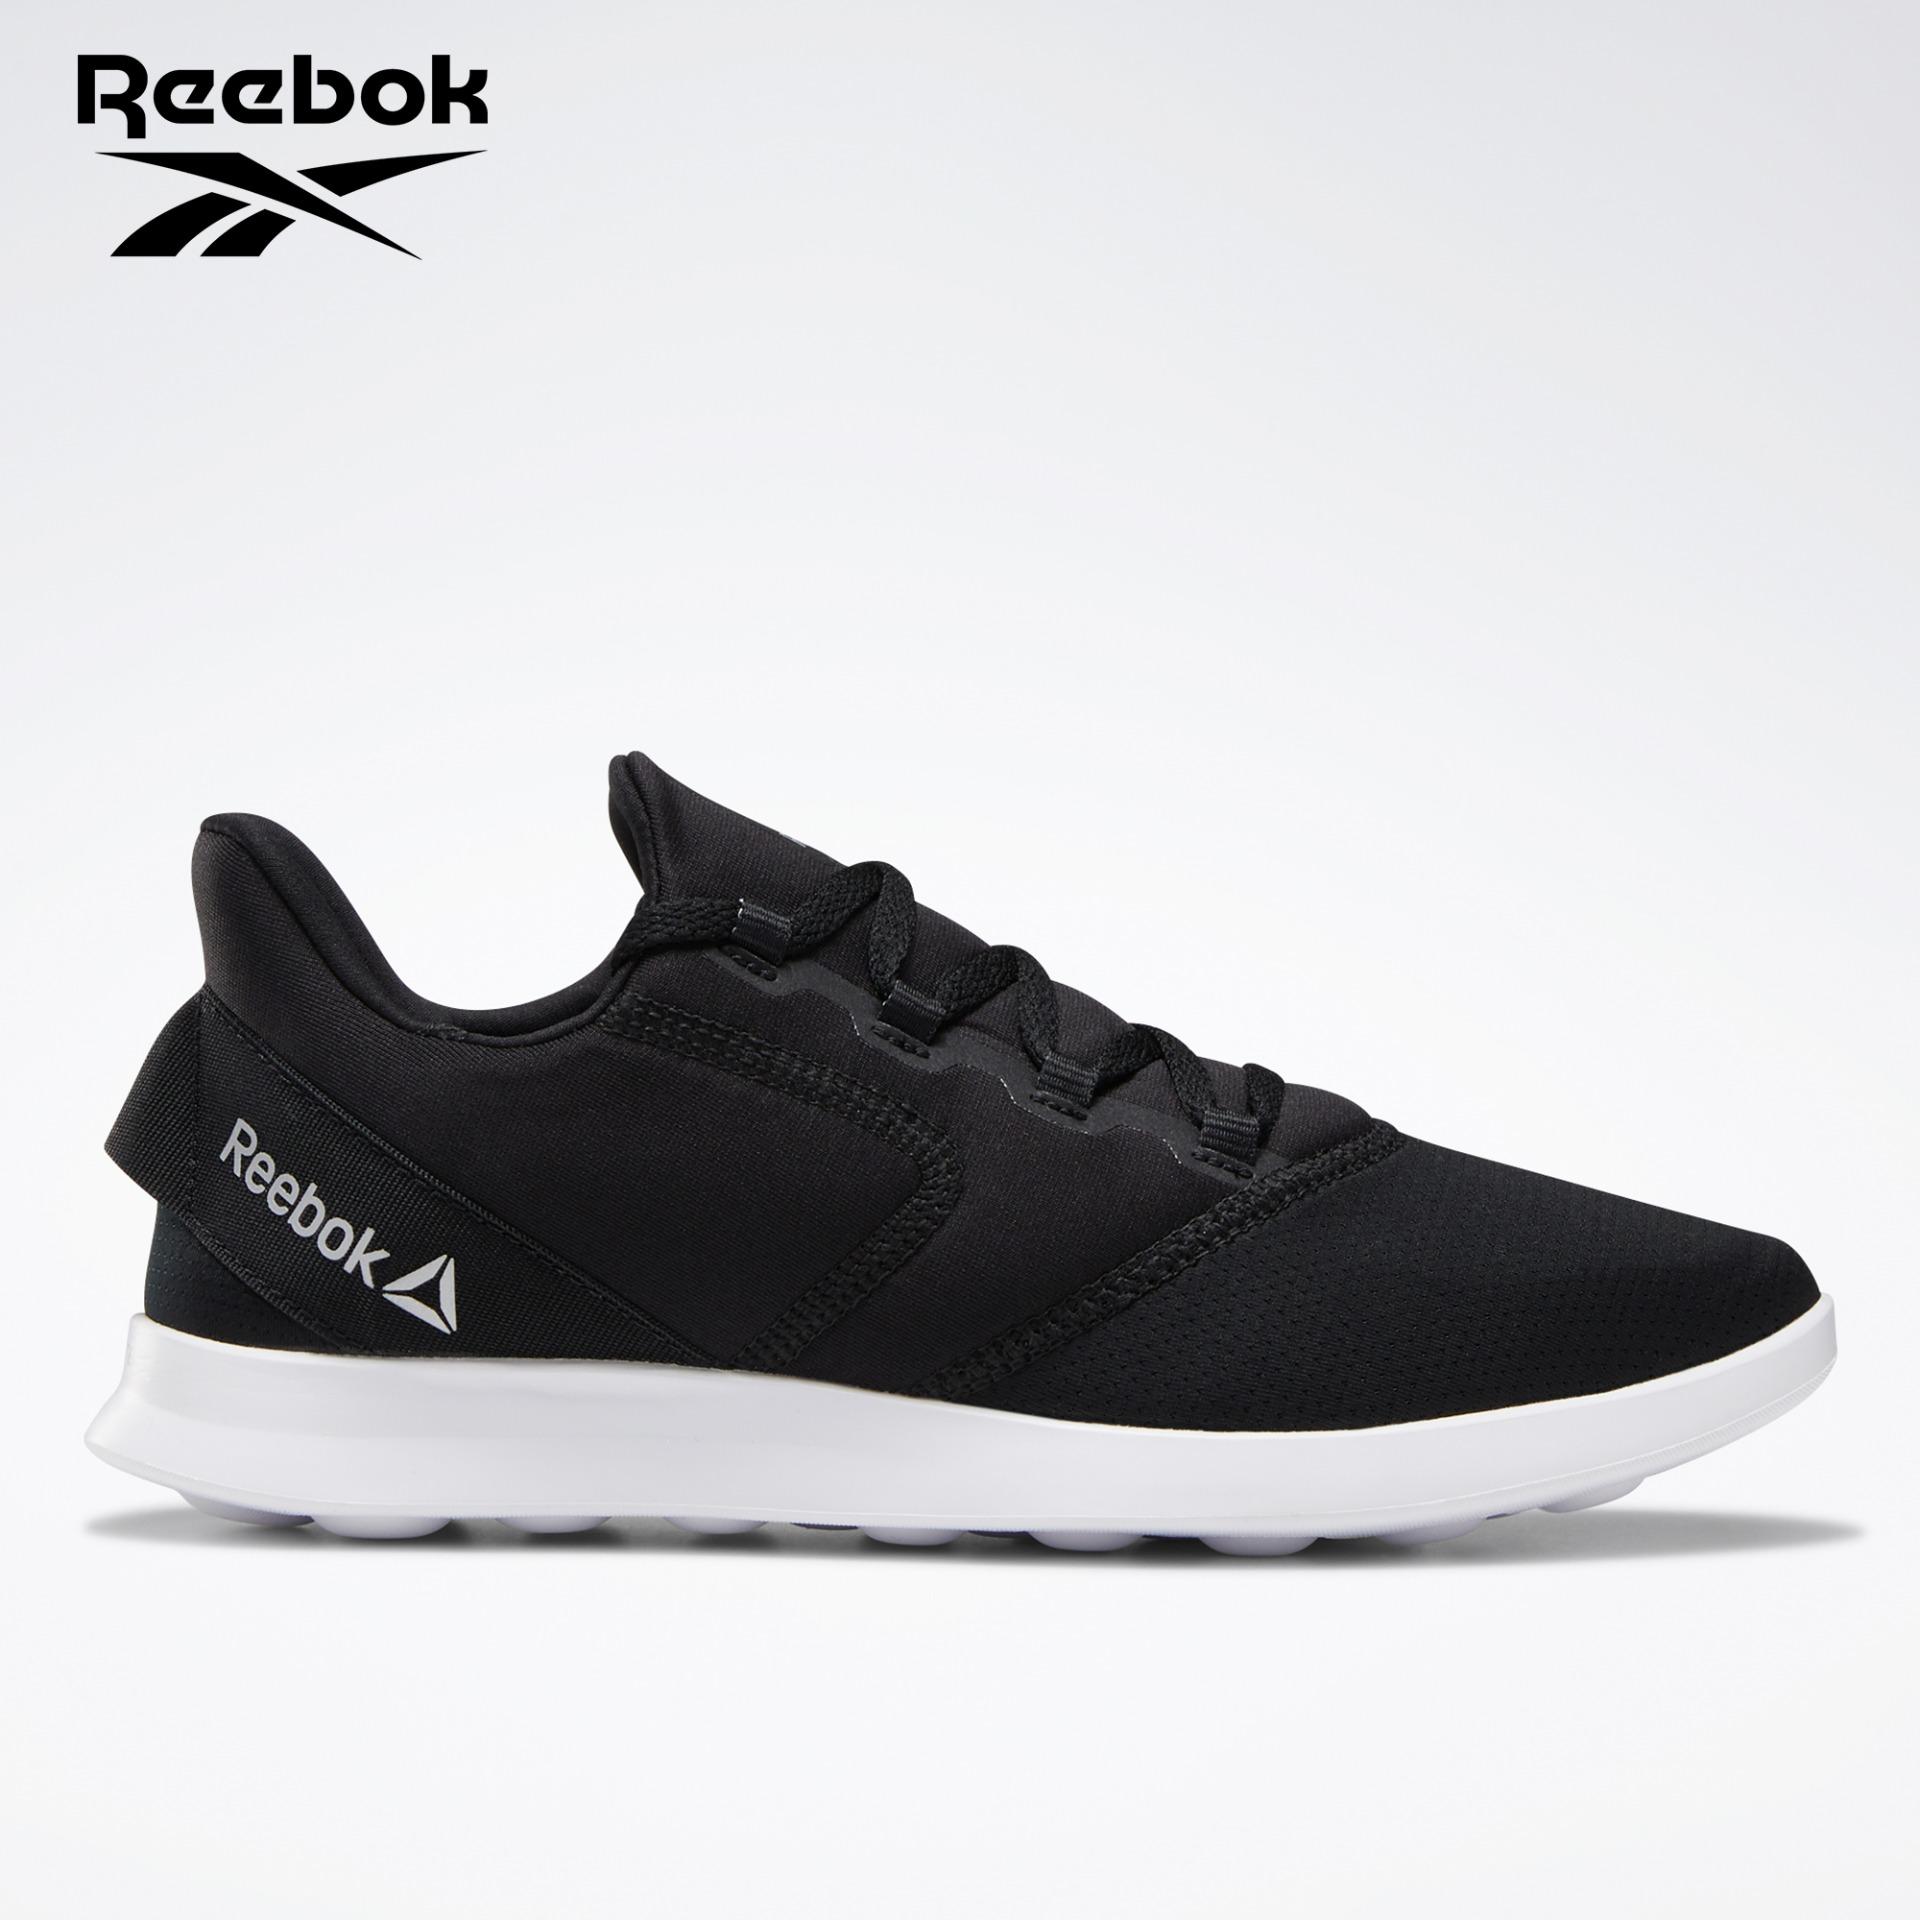 price of reebok shoes in the philippines